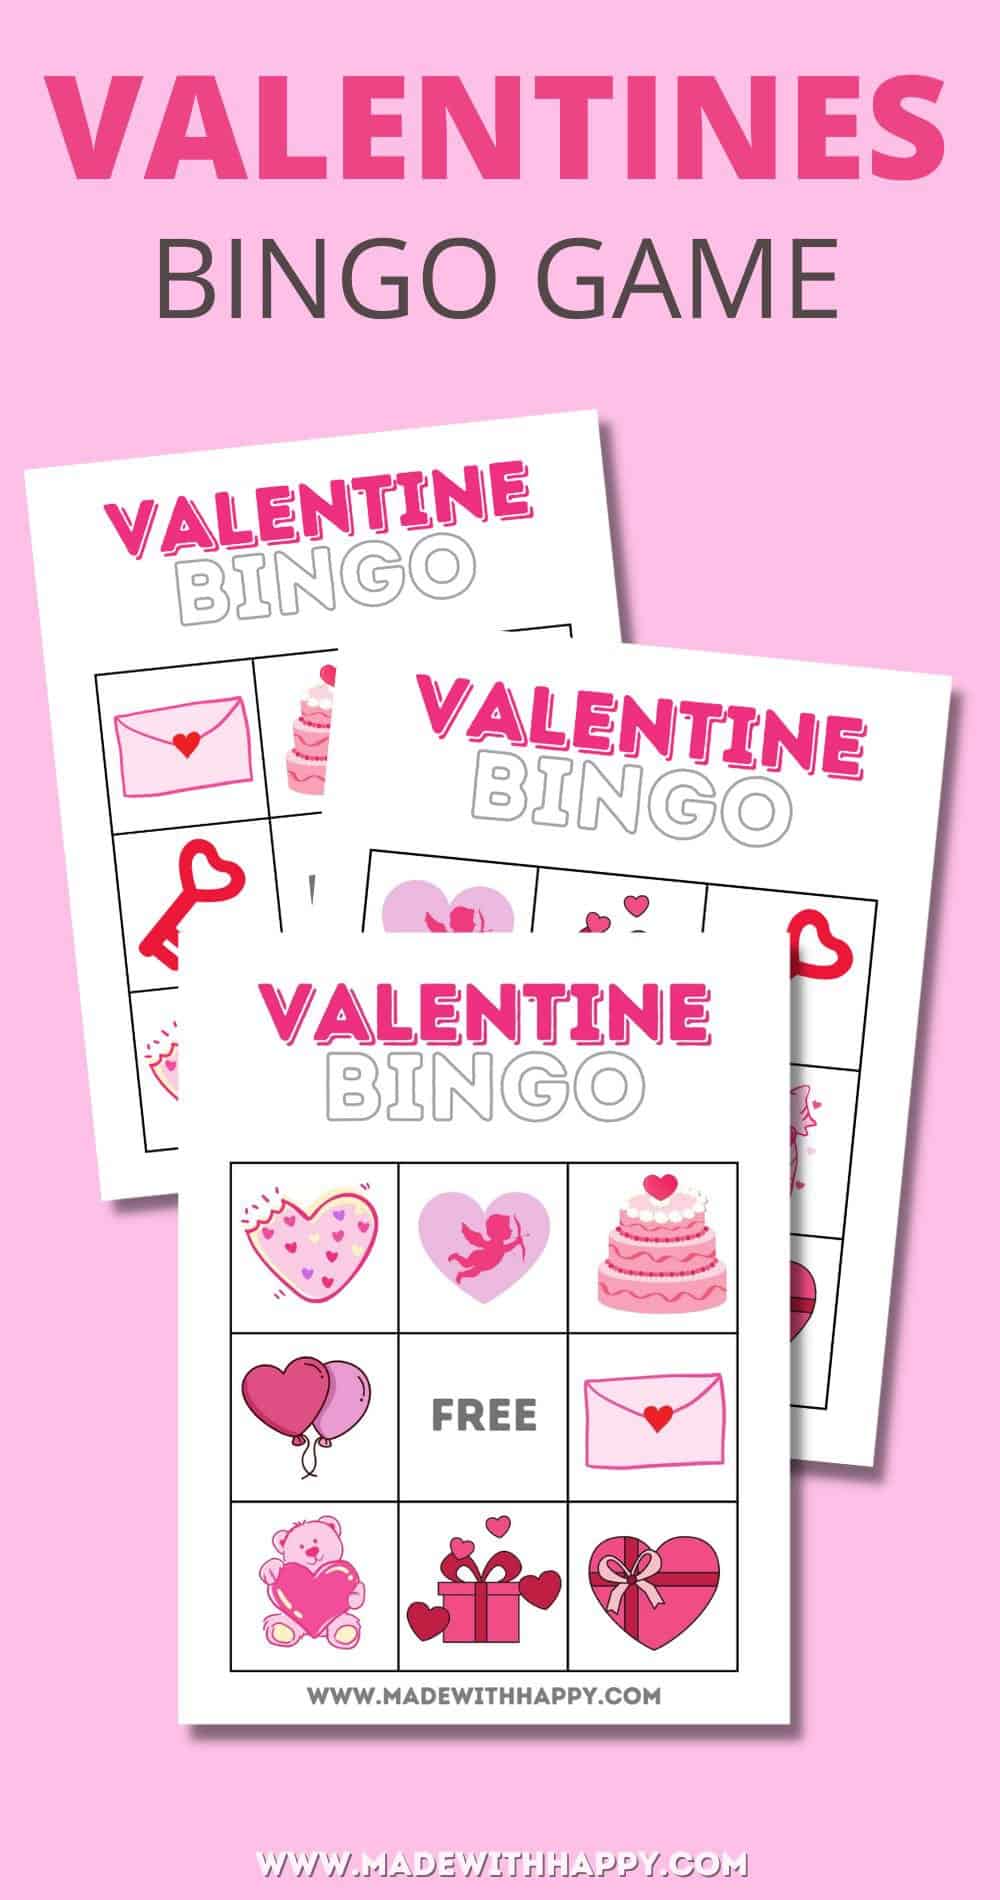 Valentine Bingo - Free Printable Game for Kids - Made with HAPPY